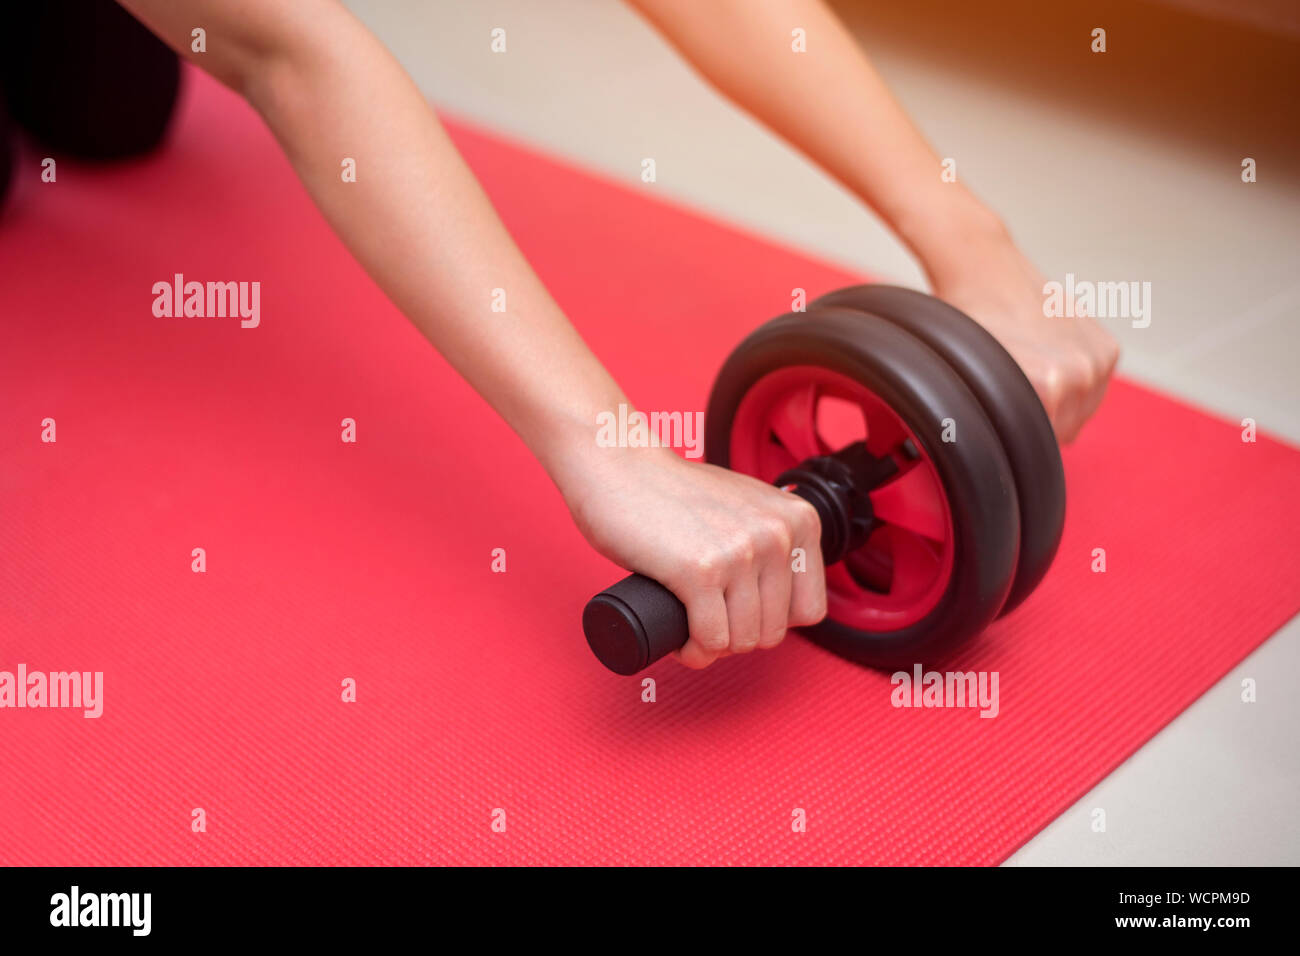 Cropped Hands Of Young Woman Holding Abdominal Toning Wheel On Exercise Mat At Home Stock Photo